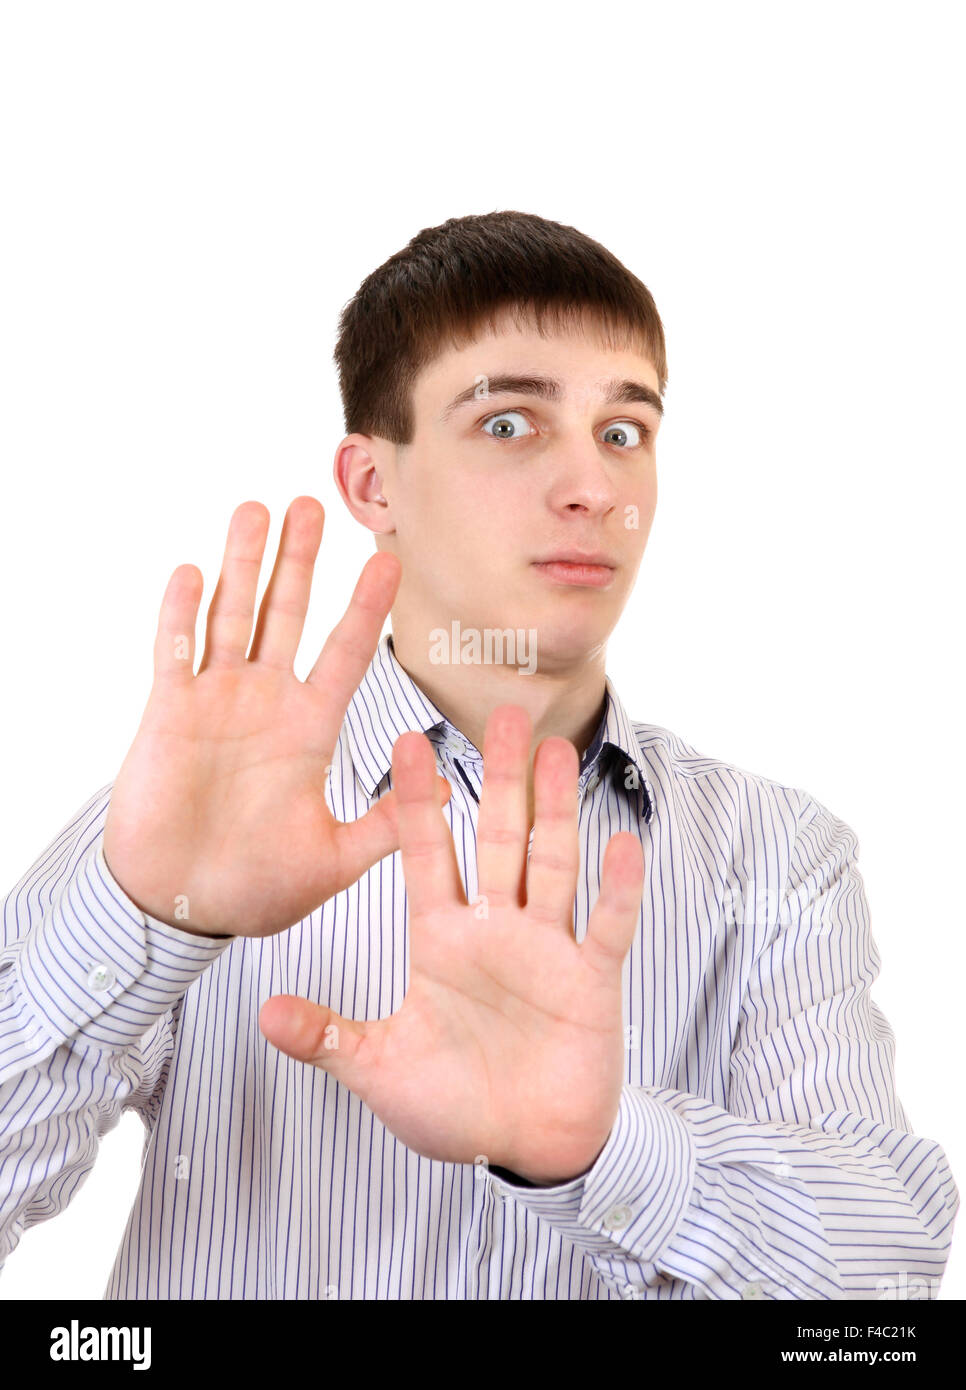 Teenager with refusal gesture Stock Photo